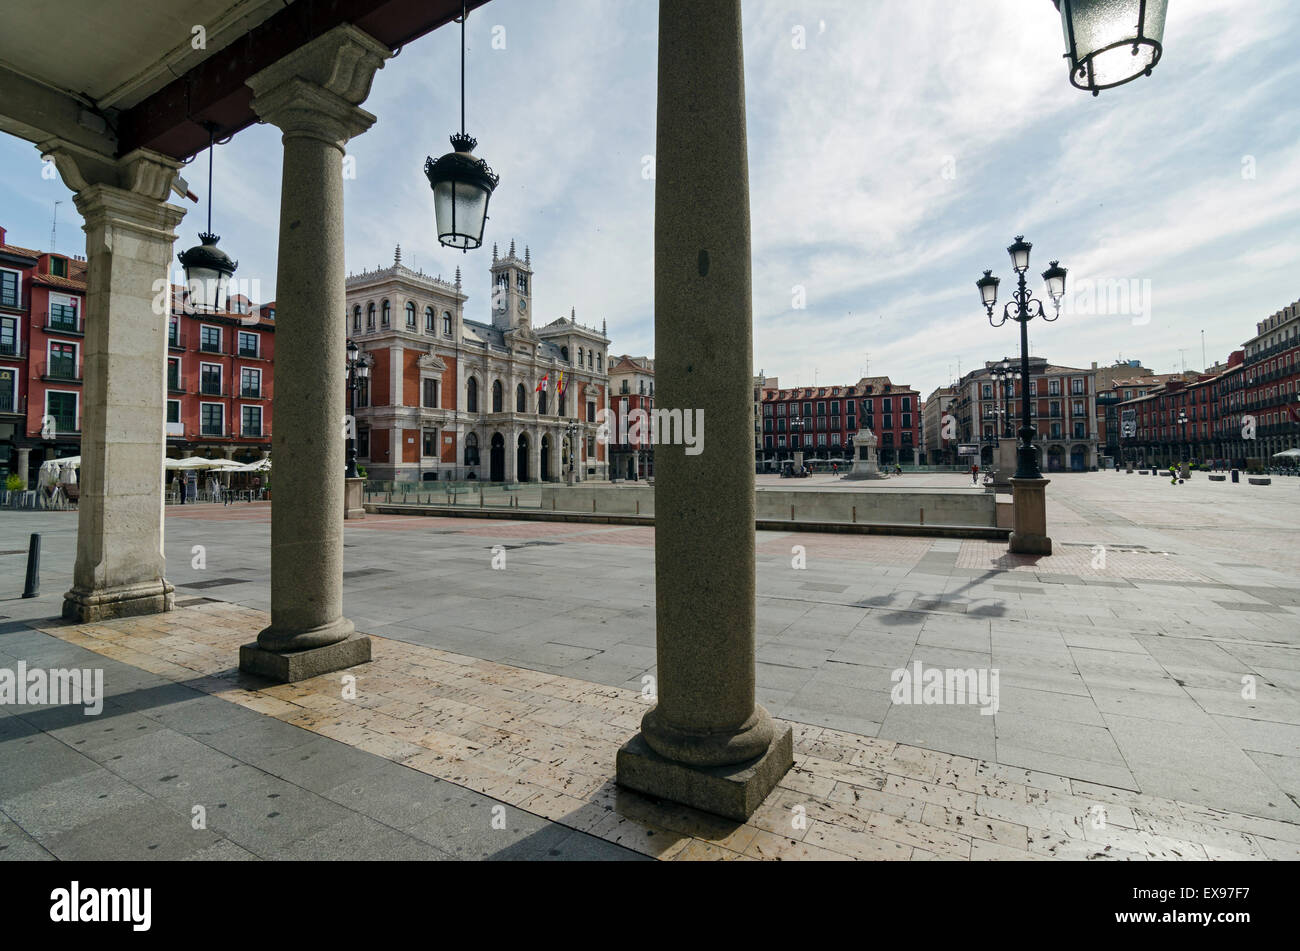 The Plaza Mayor and the city hall of Valladolid, Spain Stock Photo